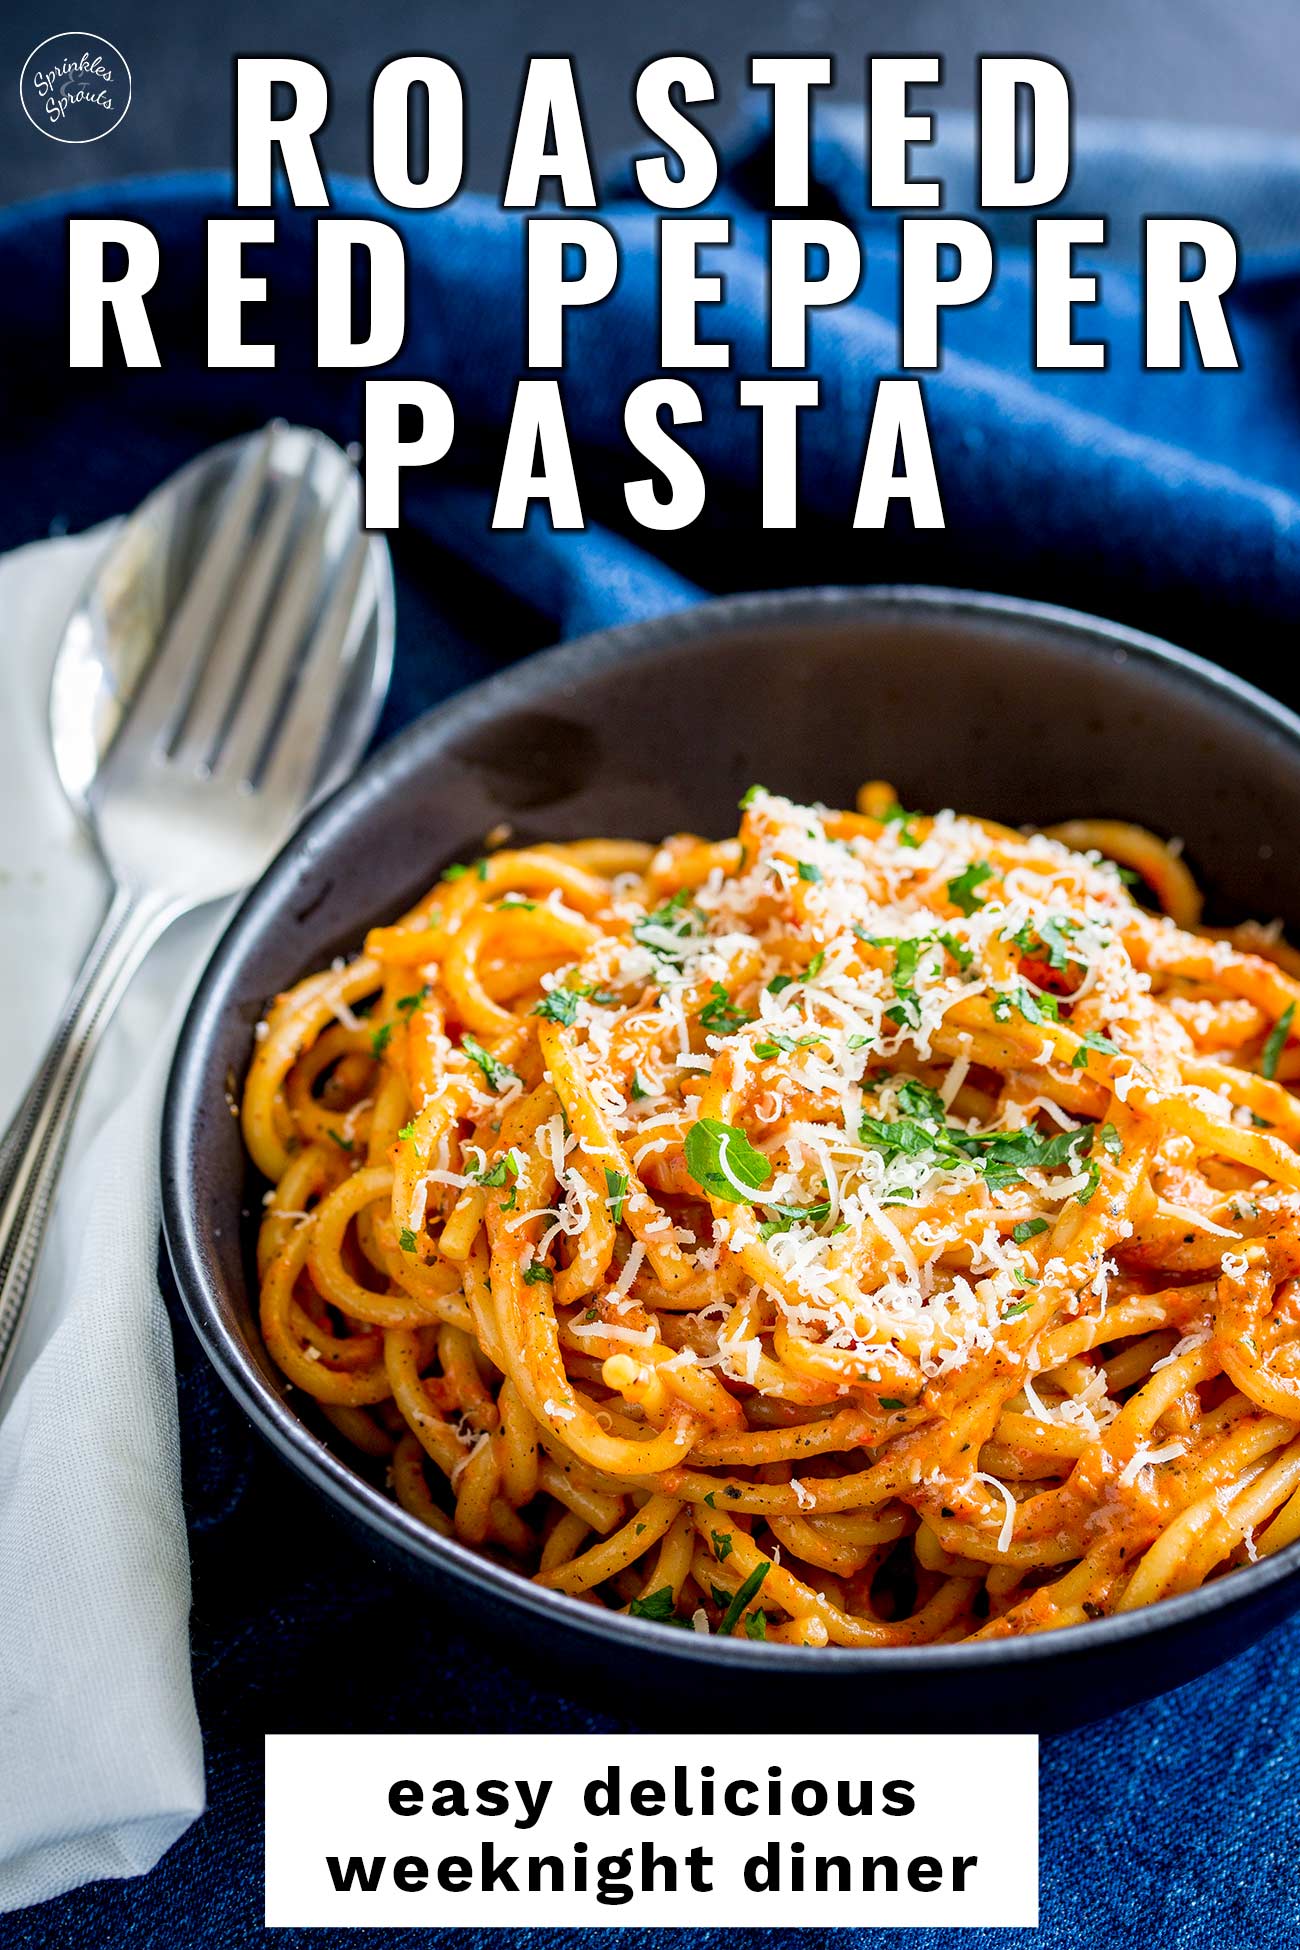 PINTEREST IMAGE: Red Pepper Pasta with text overlay